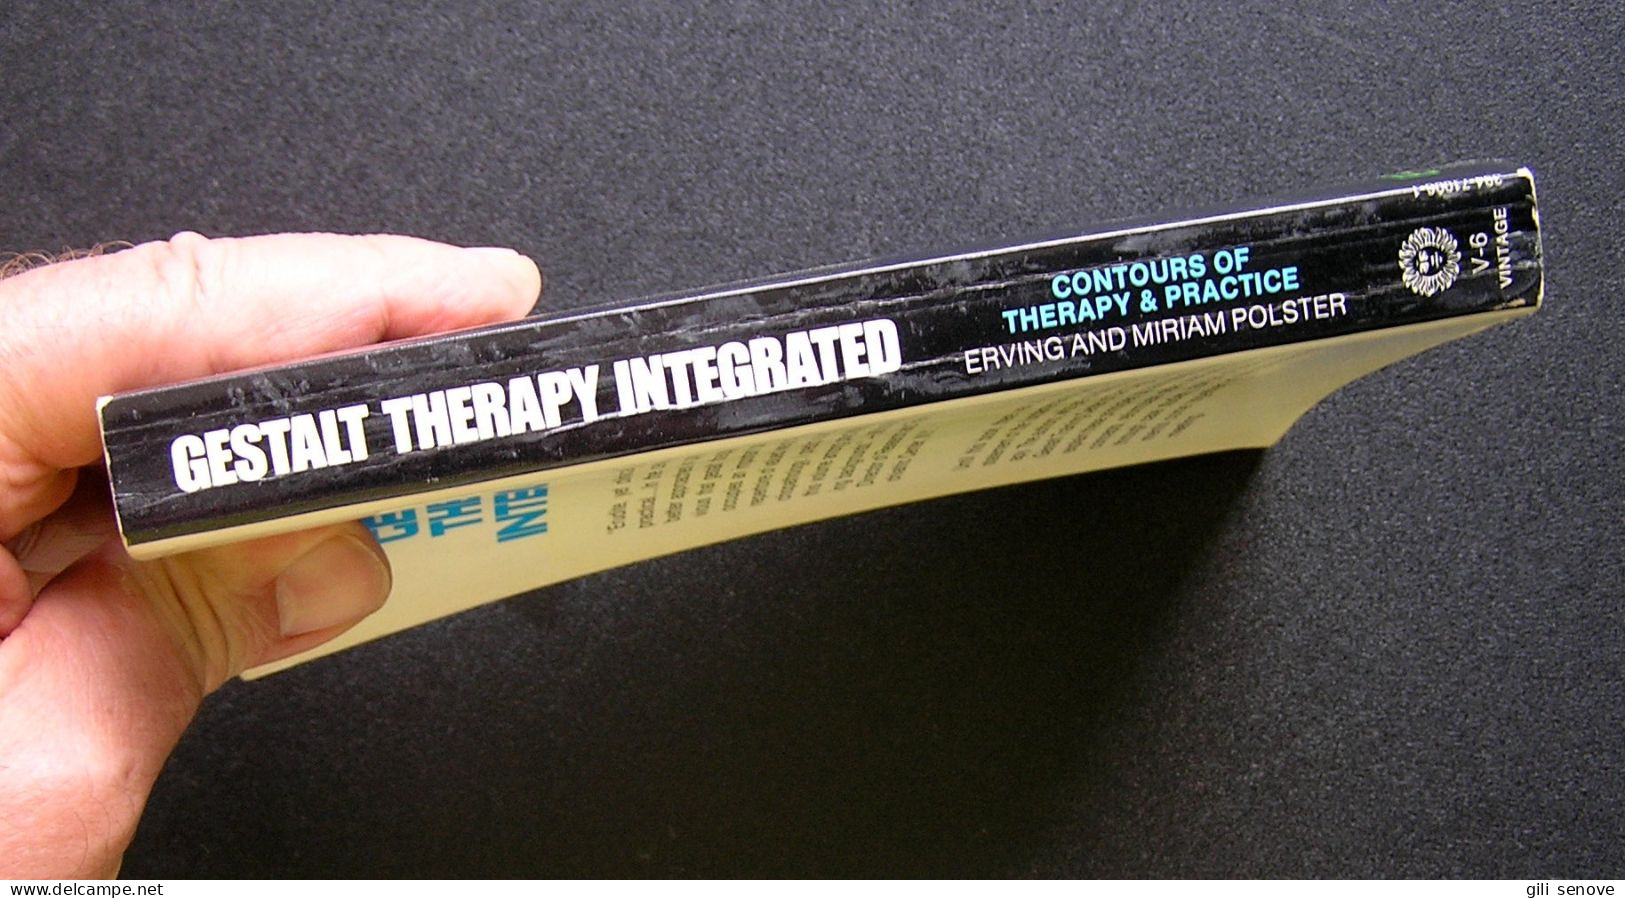 Gestalt Therapy Integrated: Contours of Theory & Practice 1994